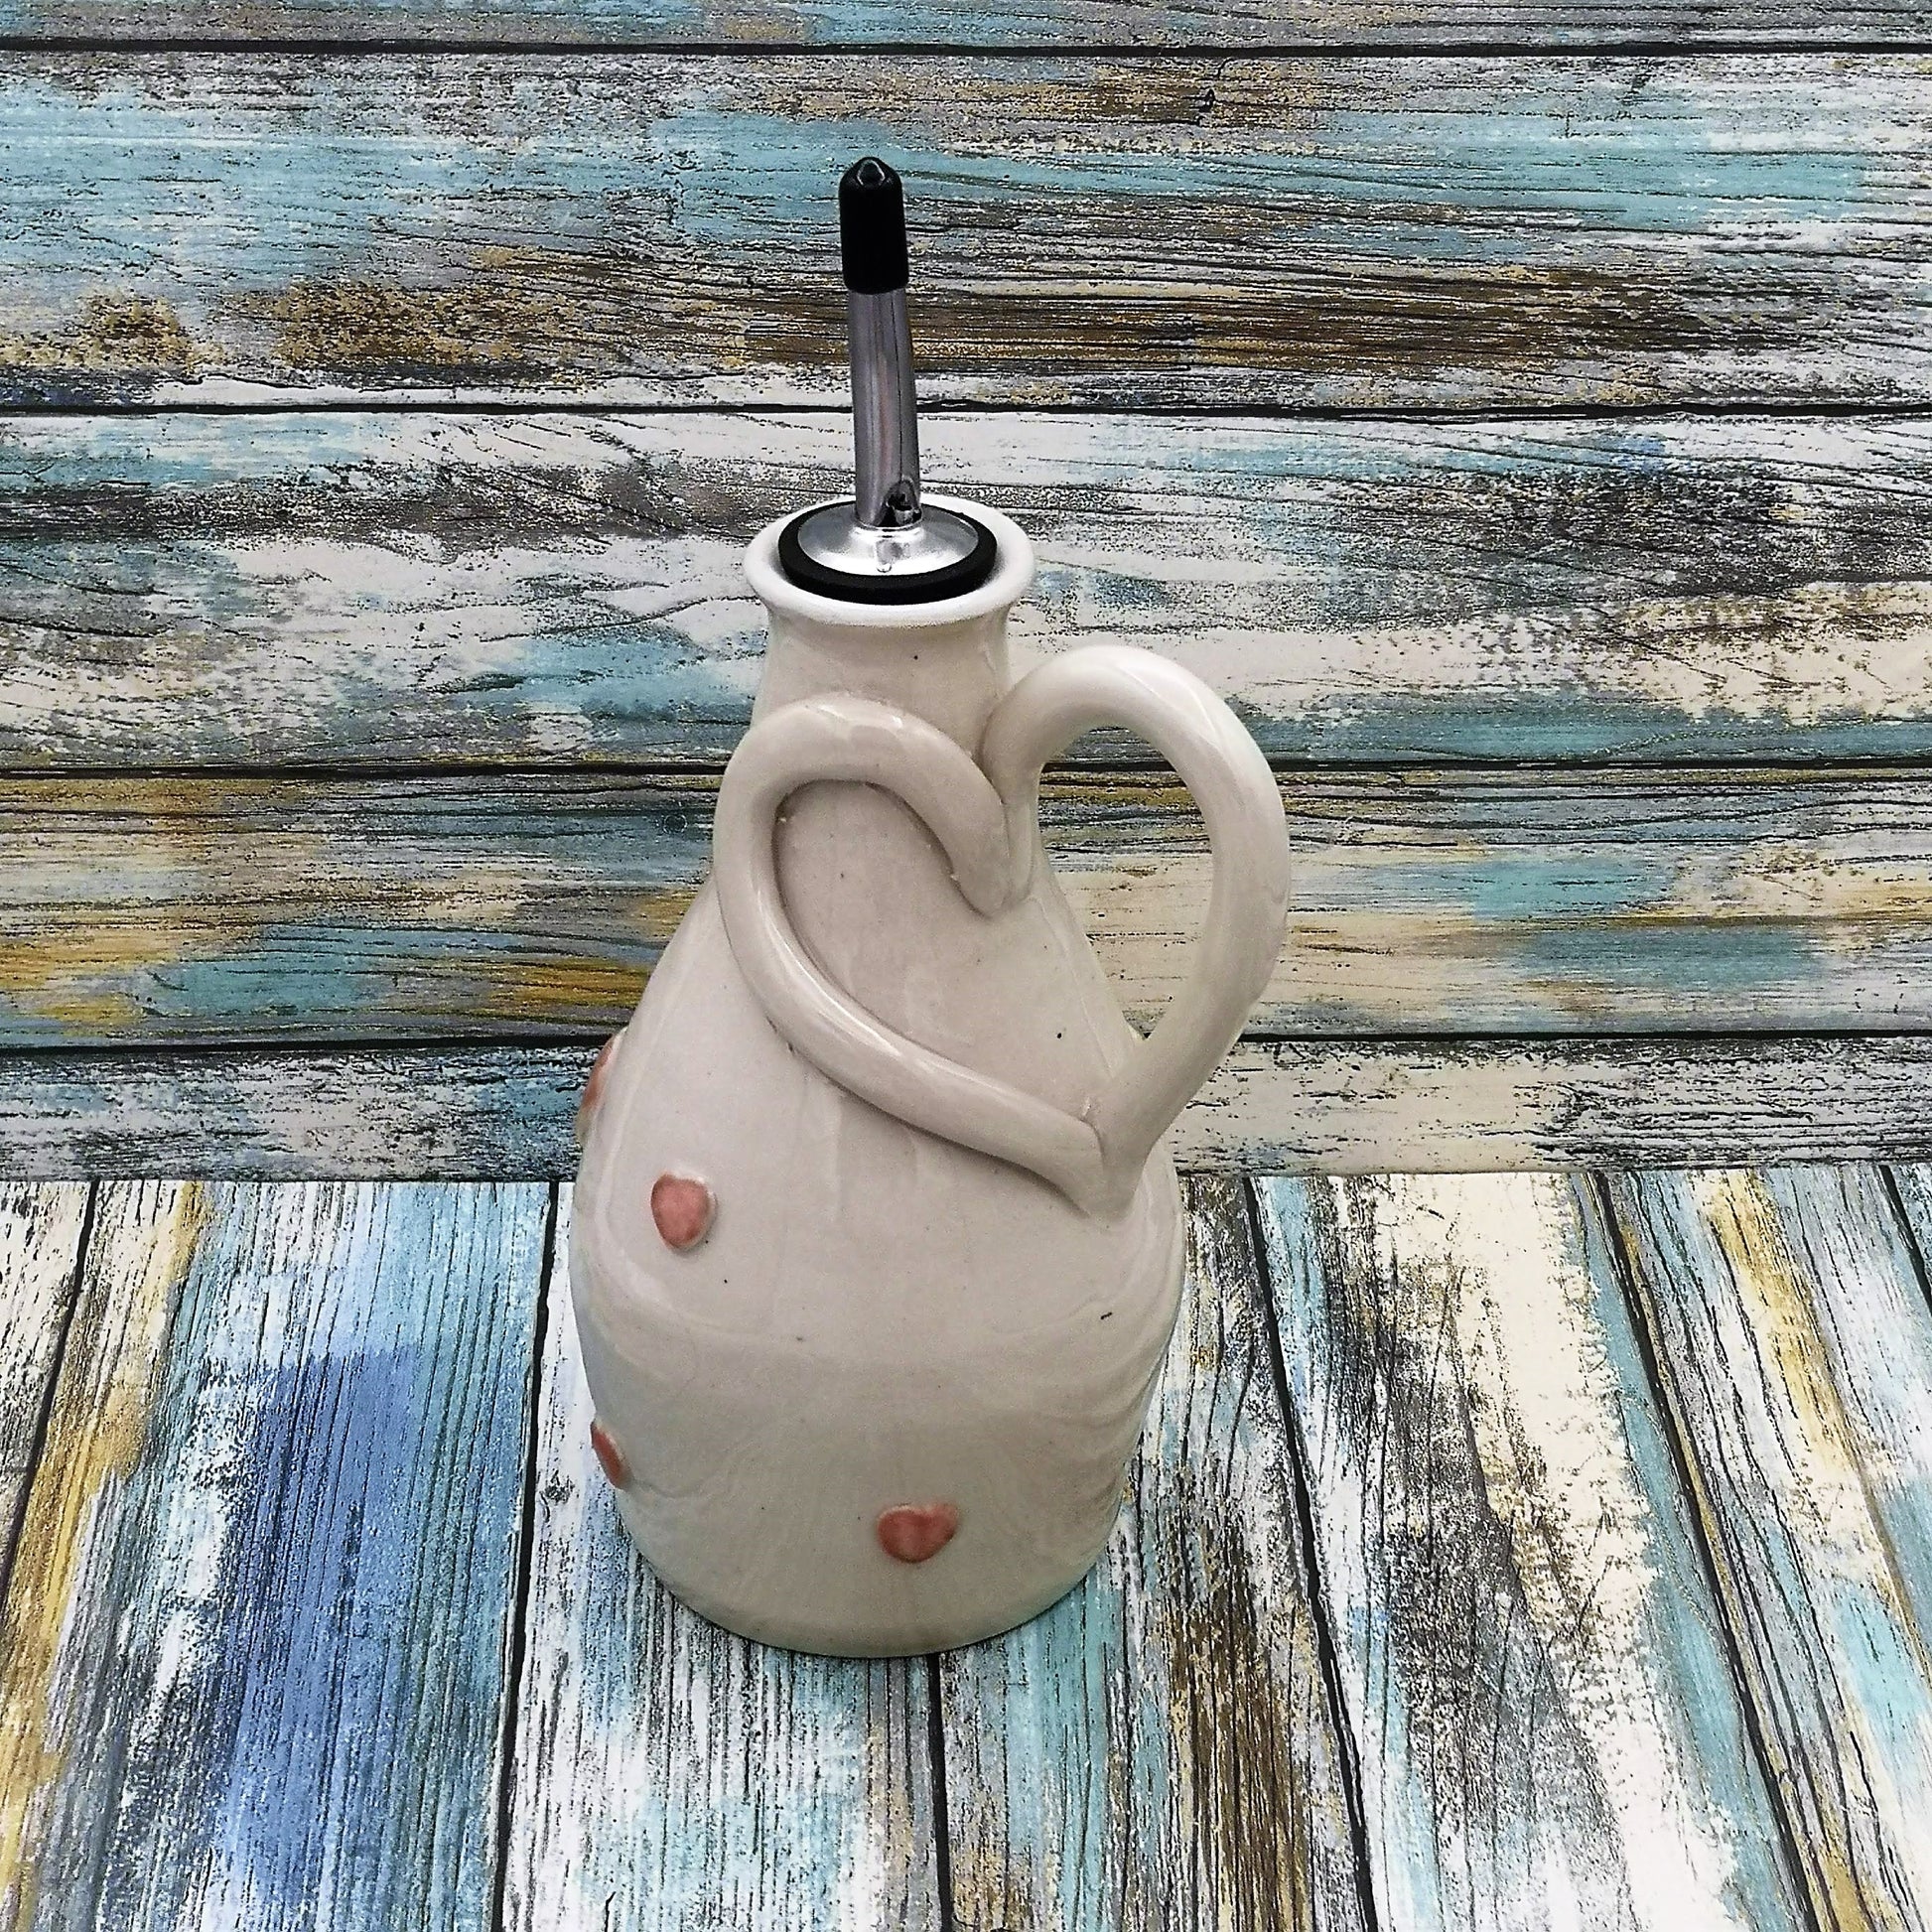 Handmade Ceramic Beige With Pink Hearts Olive Oil Dispenser, Stoneware Pottery Olive Oil Cruet, Decorative Bottles, Mothers Day Cooking Gift - Ceramica Ana Rafael